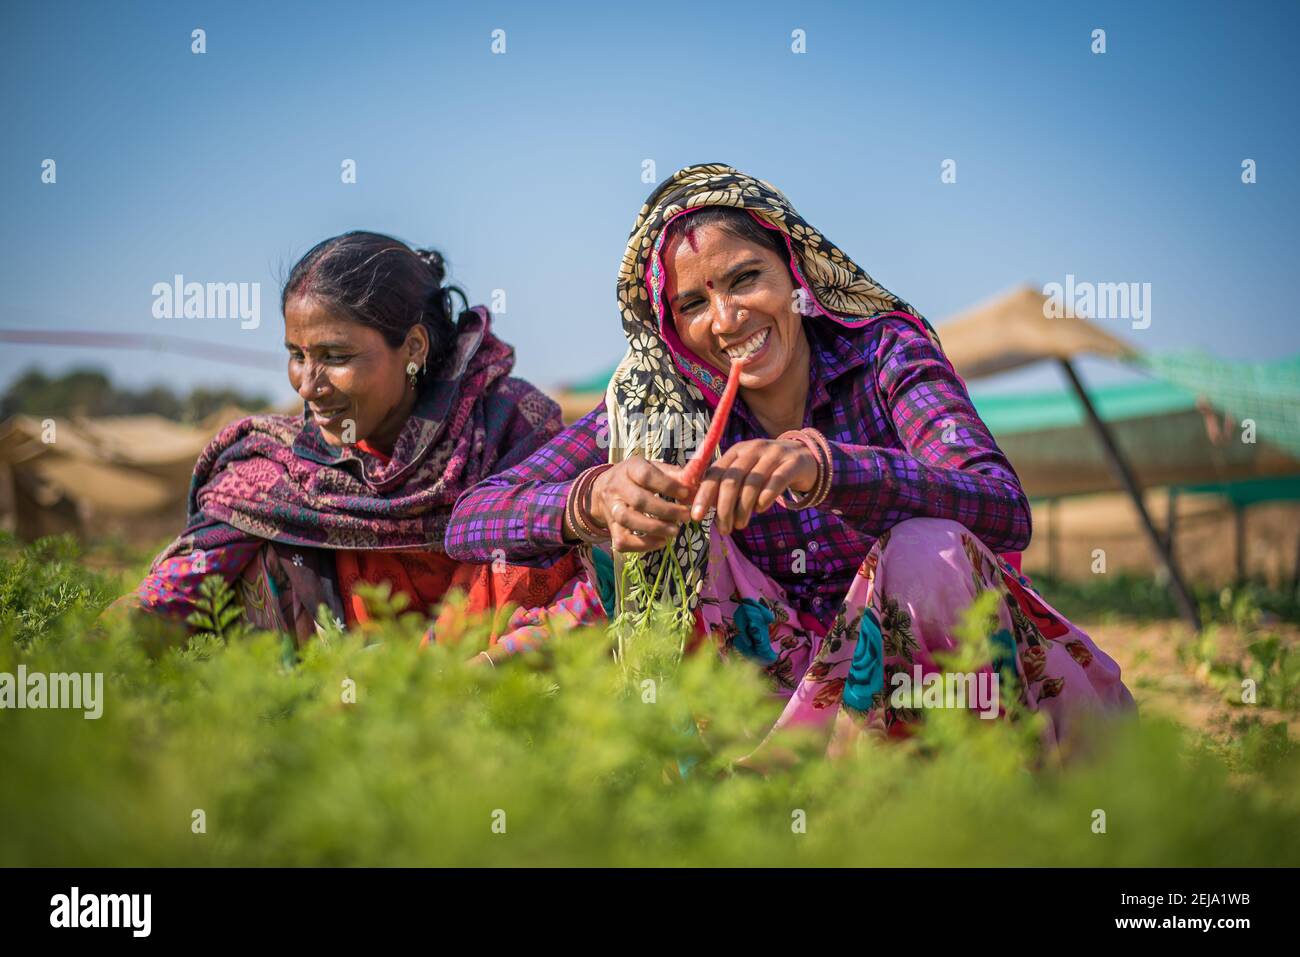 Rajasthan. India. 07-02-2018.Women working in vegetable plantation in rural community. Women apart of taking care of children, they have an important Stock Photo